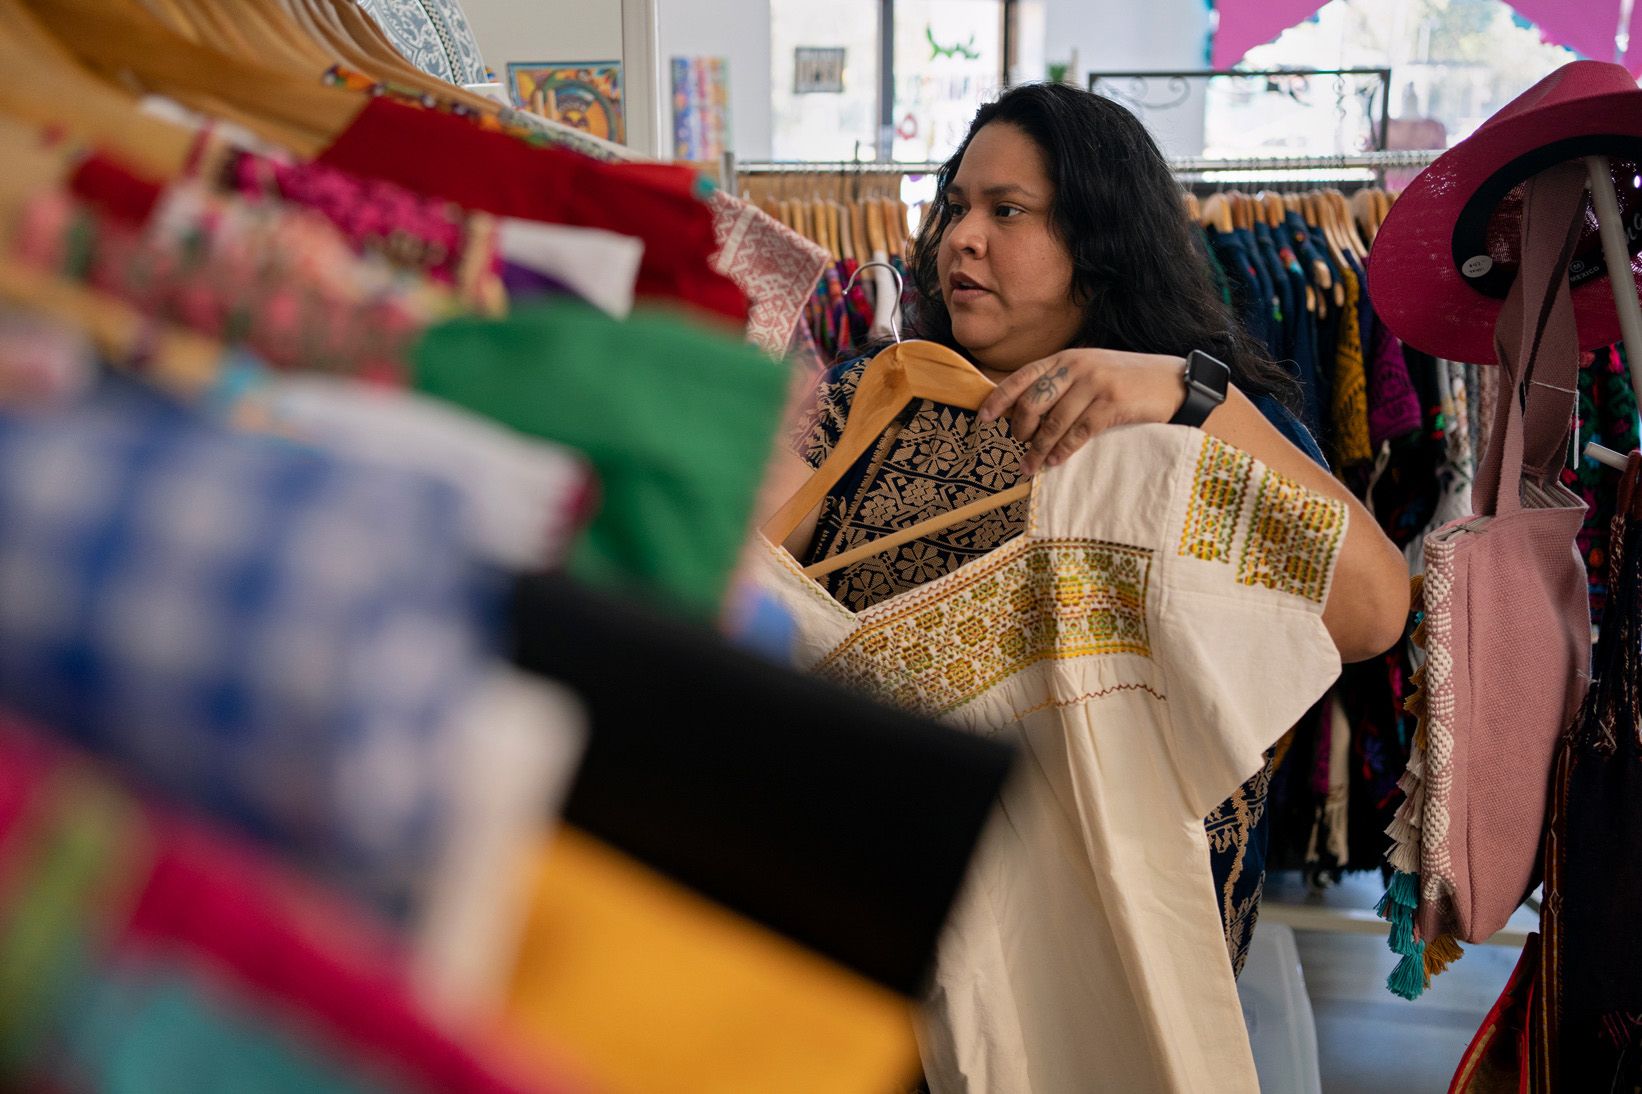 Cindy Laguna hangs clothing at Kismet Boutique on January 4 in Houston. The owner of “Todo Fresh,” Laguna brings artisanal goods from Mexico and helps educate both the families making these products about fair pricing, and the consumer about why fair pricing matters.